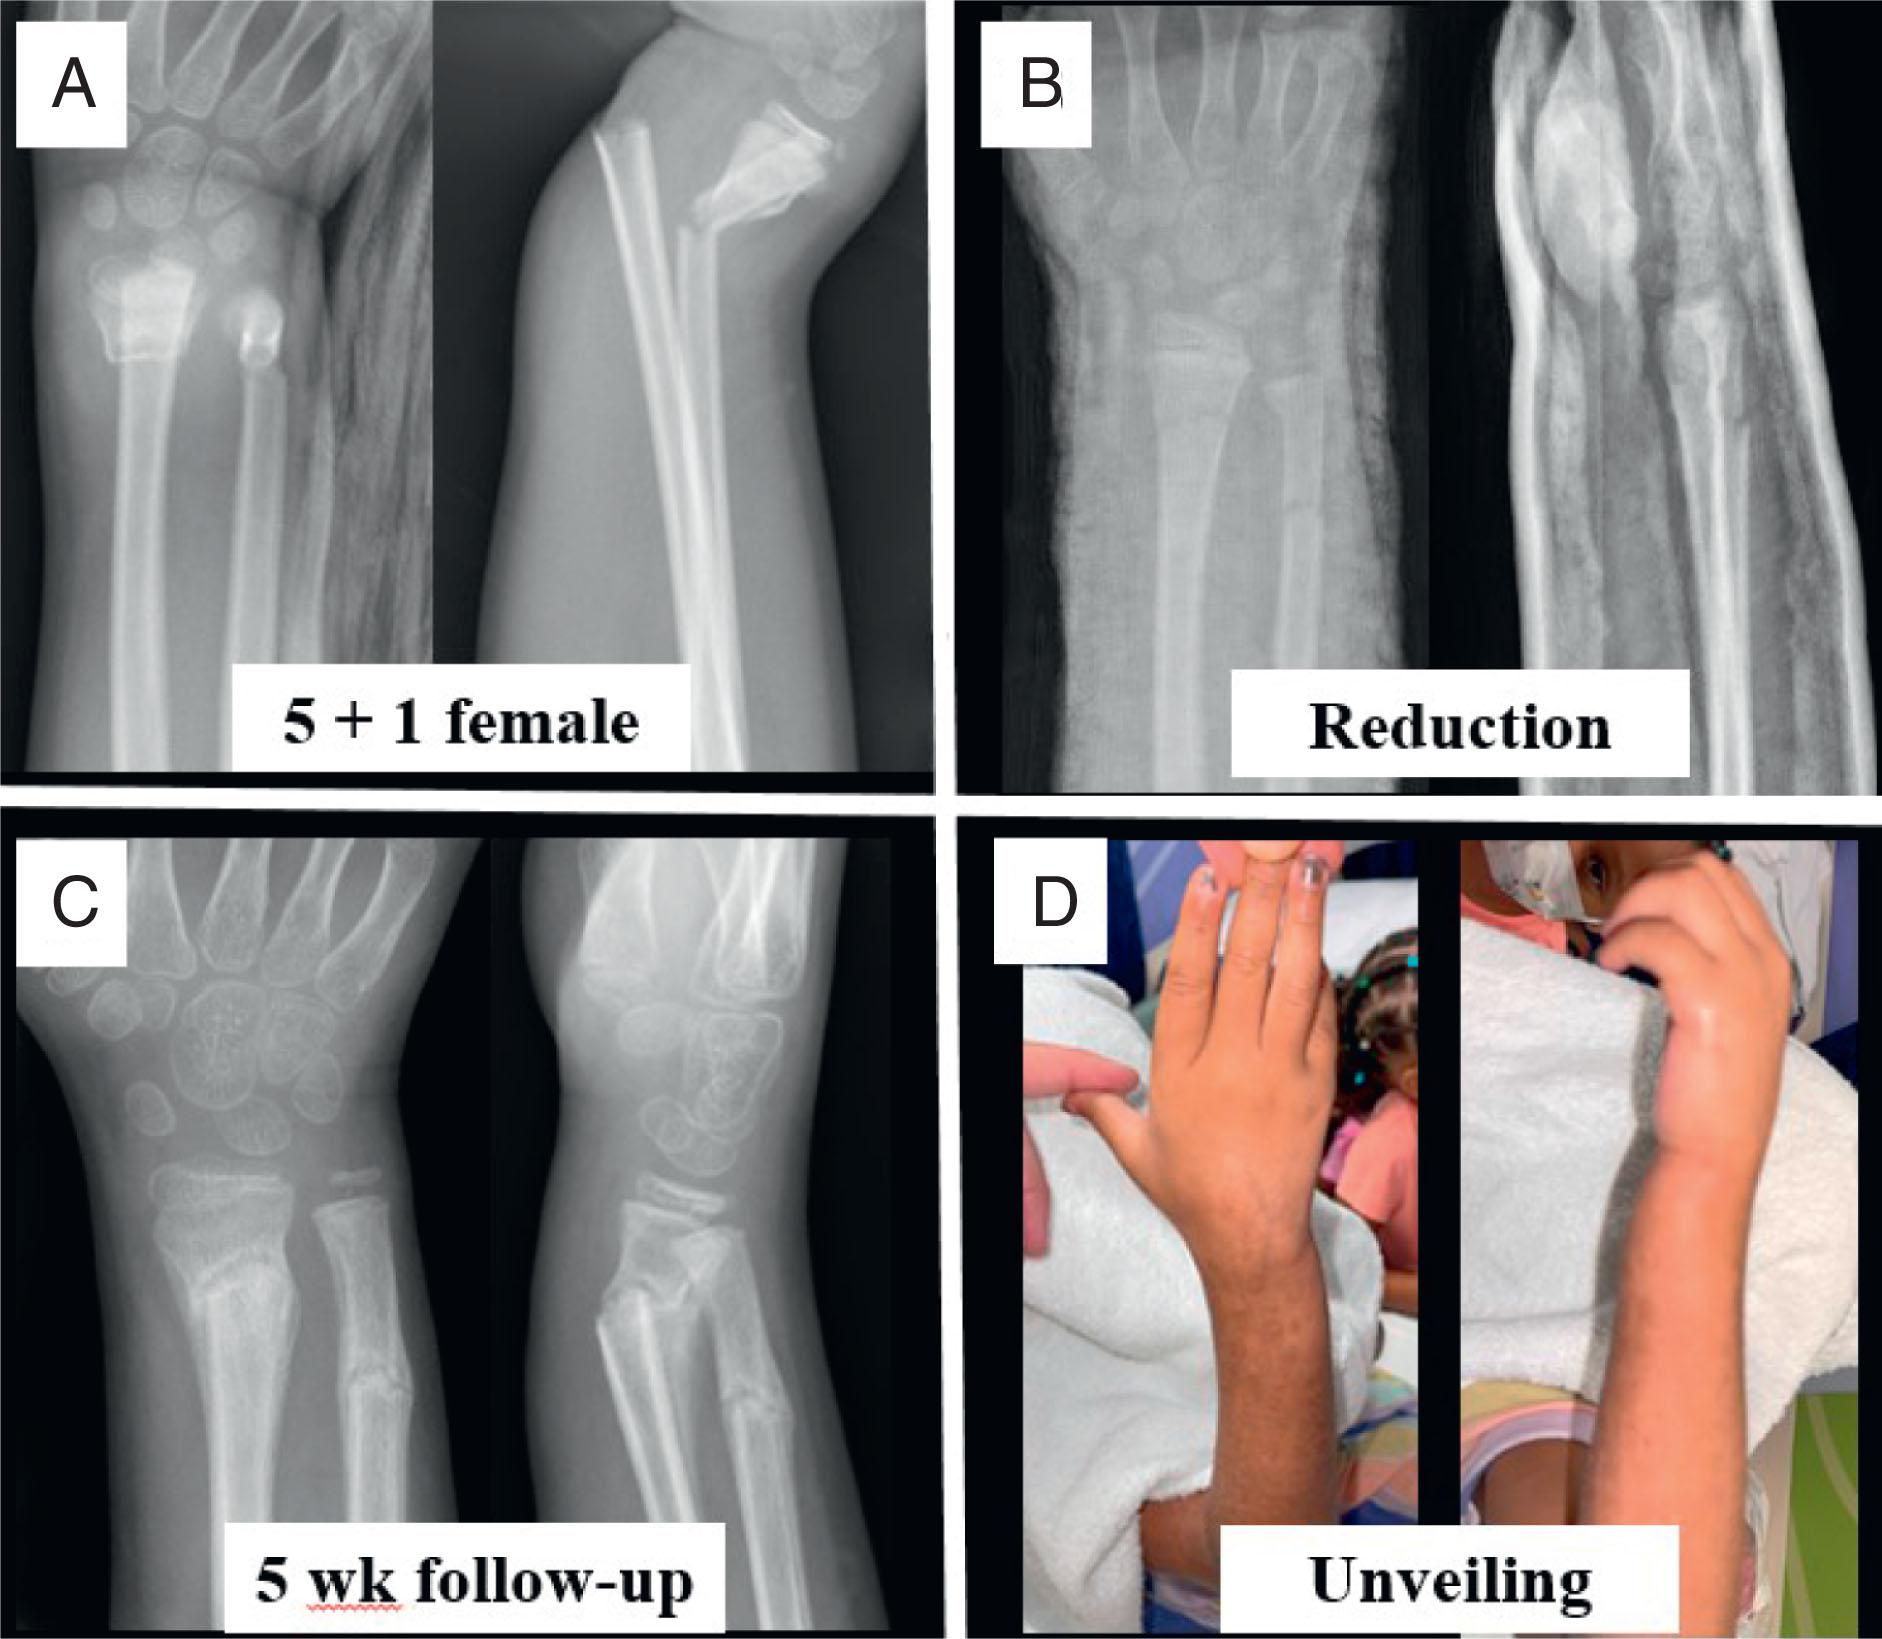 Fig. 6.11, Unveiling of Distal Radius Fracture That Developed Malalignment. (A) A 5-years-and-1-month–old female with closed distal radius and ulna fractures. (B) Initial anatomic reduction. (C) Loss of reduction detected at 5 weeks’ follow-up. (D) Unveiling reveals minimal clinical deformity that reassures family, and continued nonoperative care is undertaken.